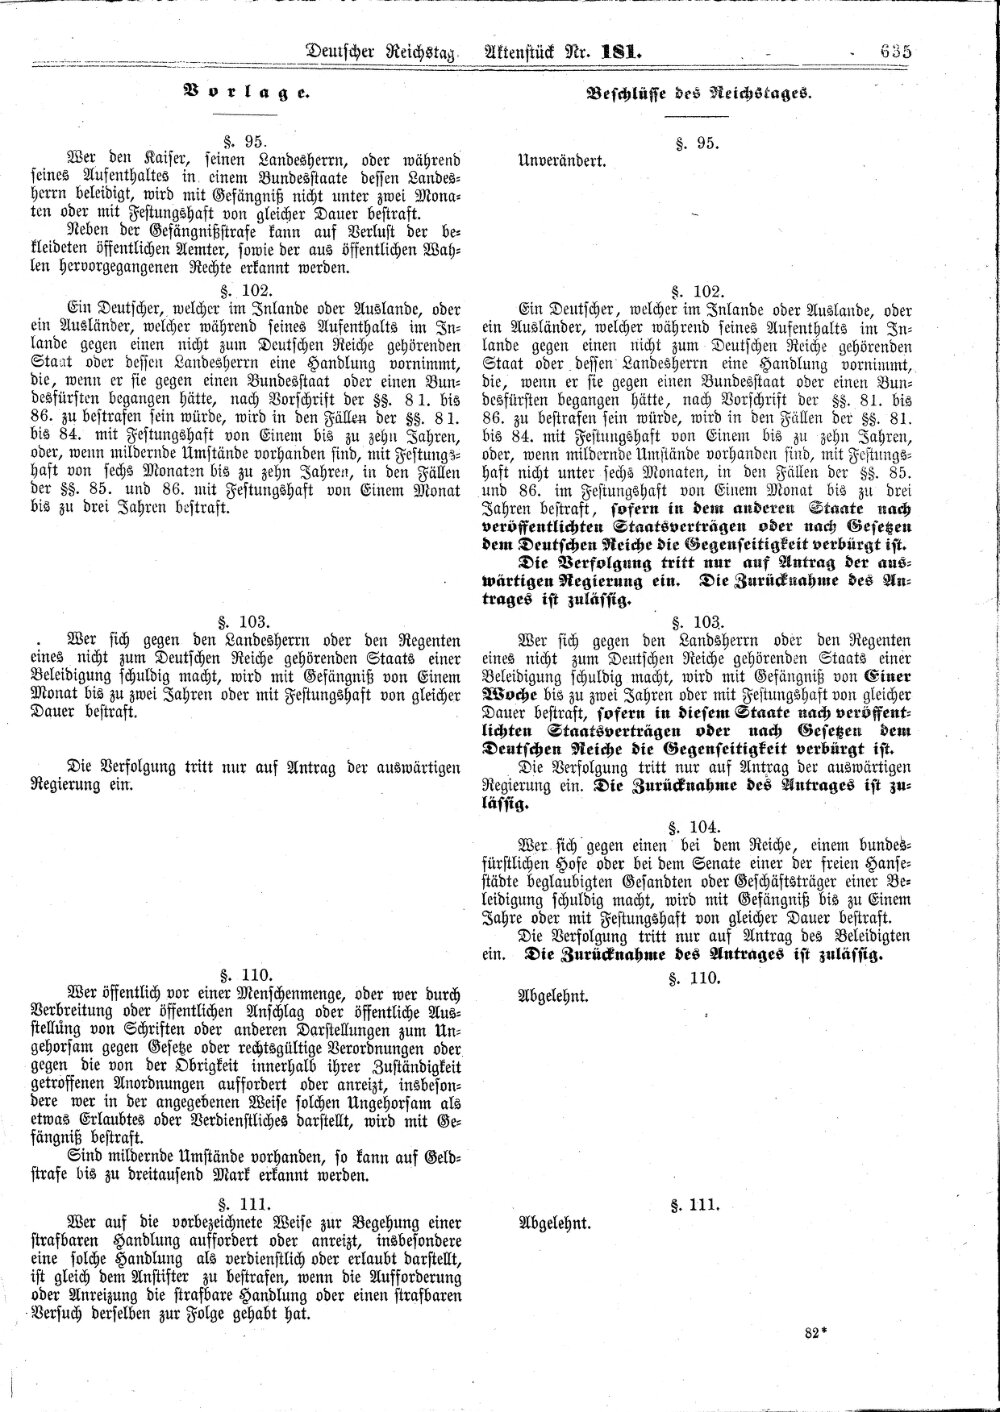 Scan of page 635